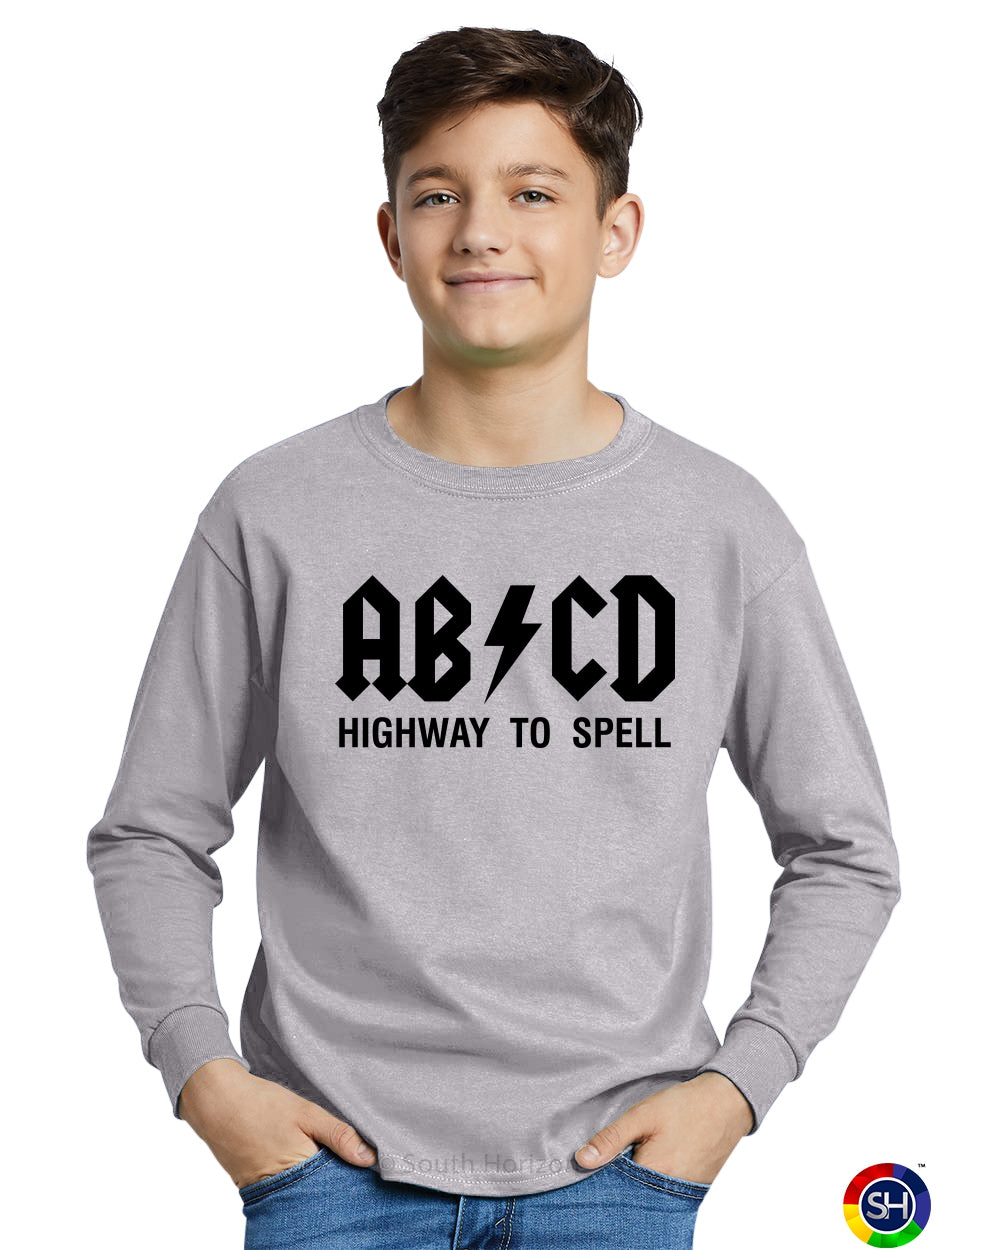 ABCD Highway To Spell on Youth Long Sleeve Shirt (#1236-203)